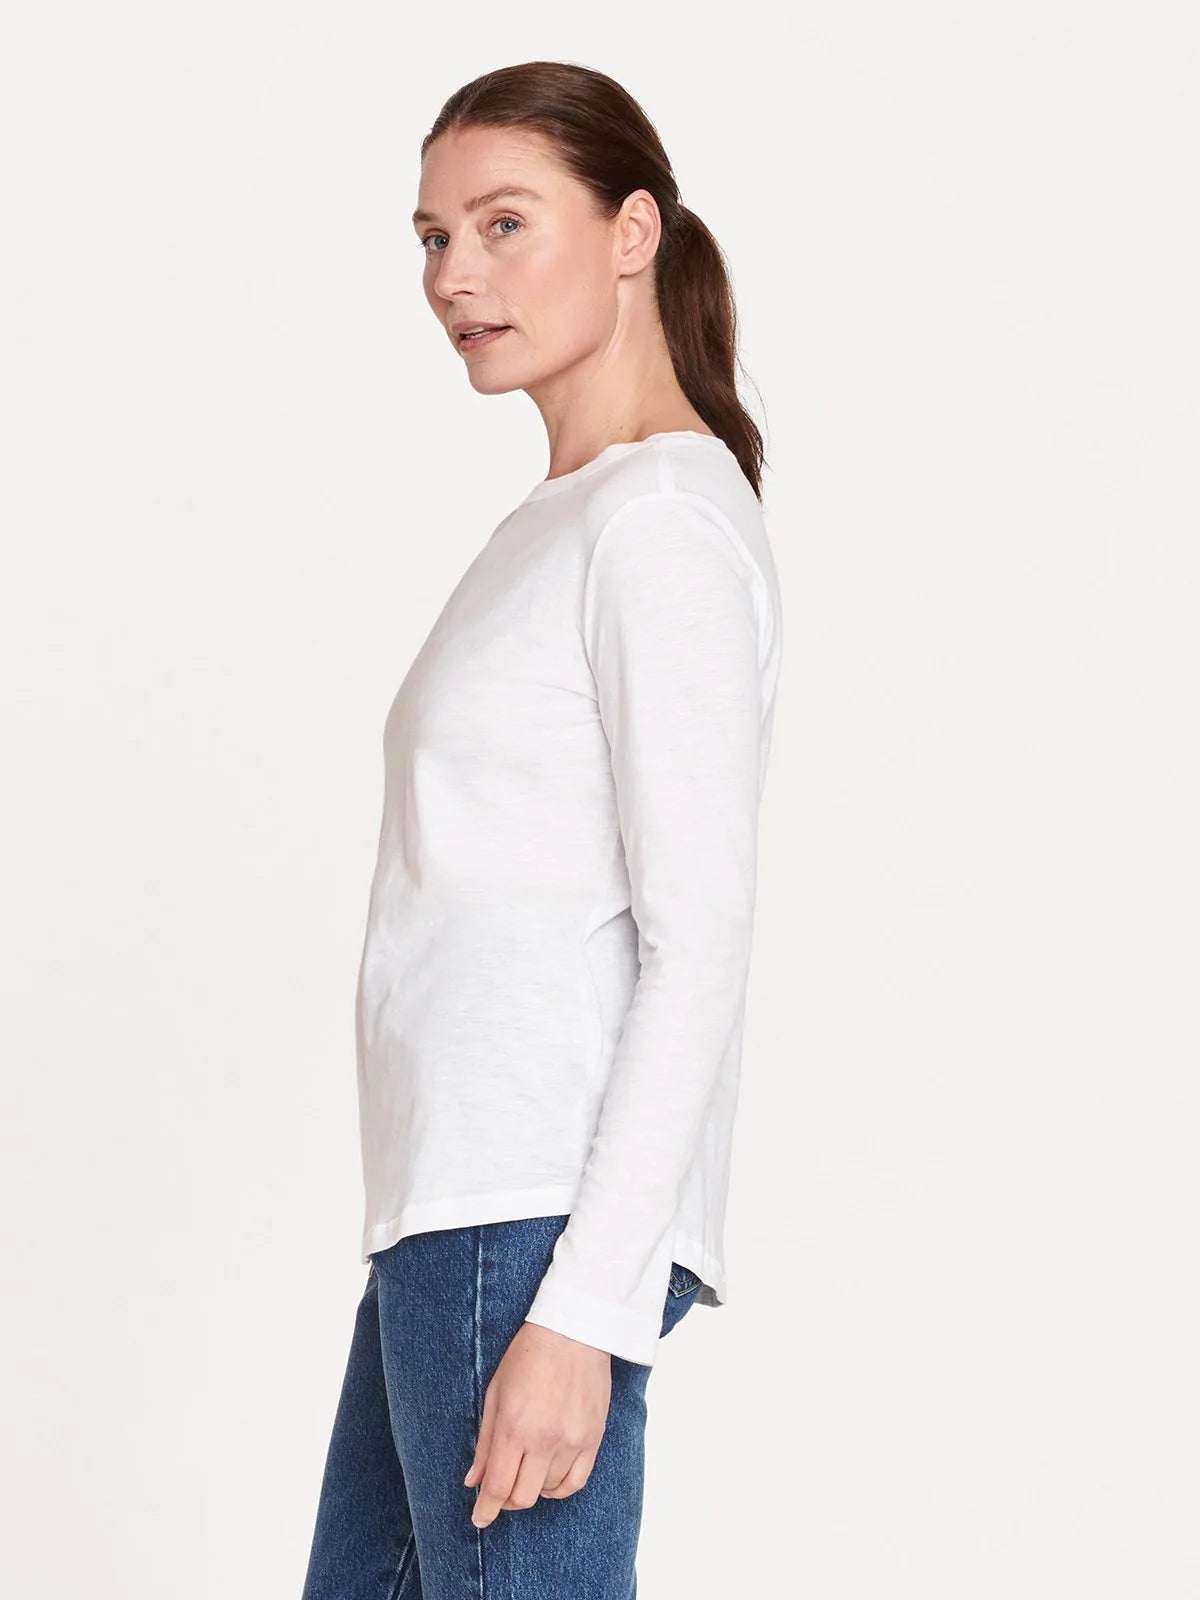 thought, womens white long sleeve cotton tee, jersey top, essentials, basics, capsule wardrobe, slow fashion, ethically made, sustainable, womens apparel, shopthecurate, curate